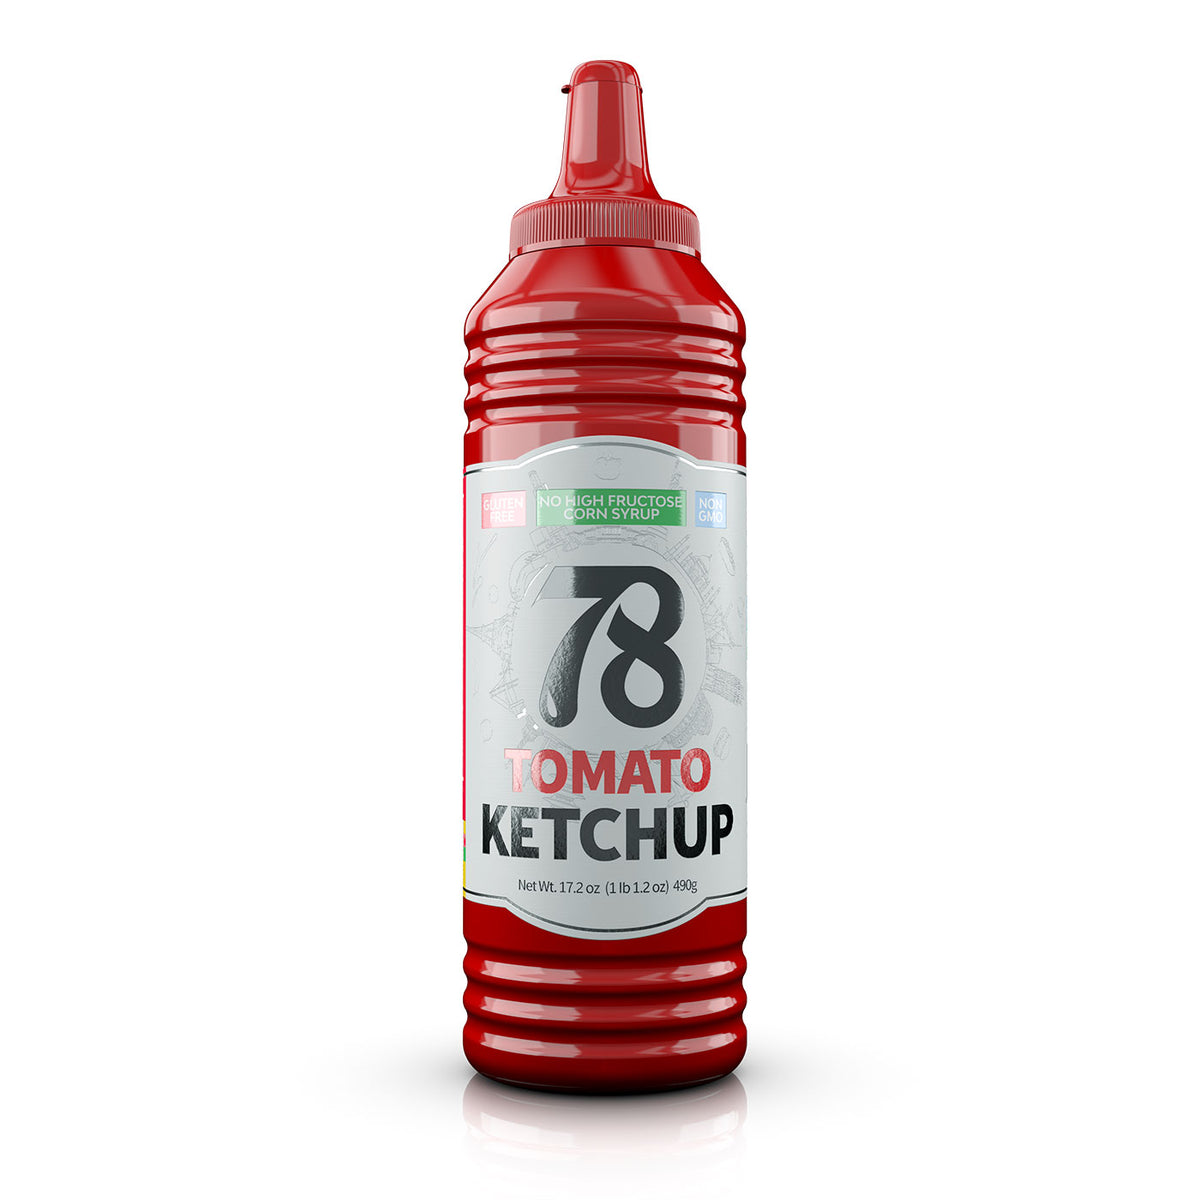 Find High-Quality ketchup and mustard bottles for Multiple Uses 